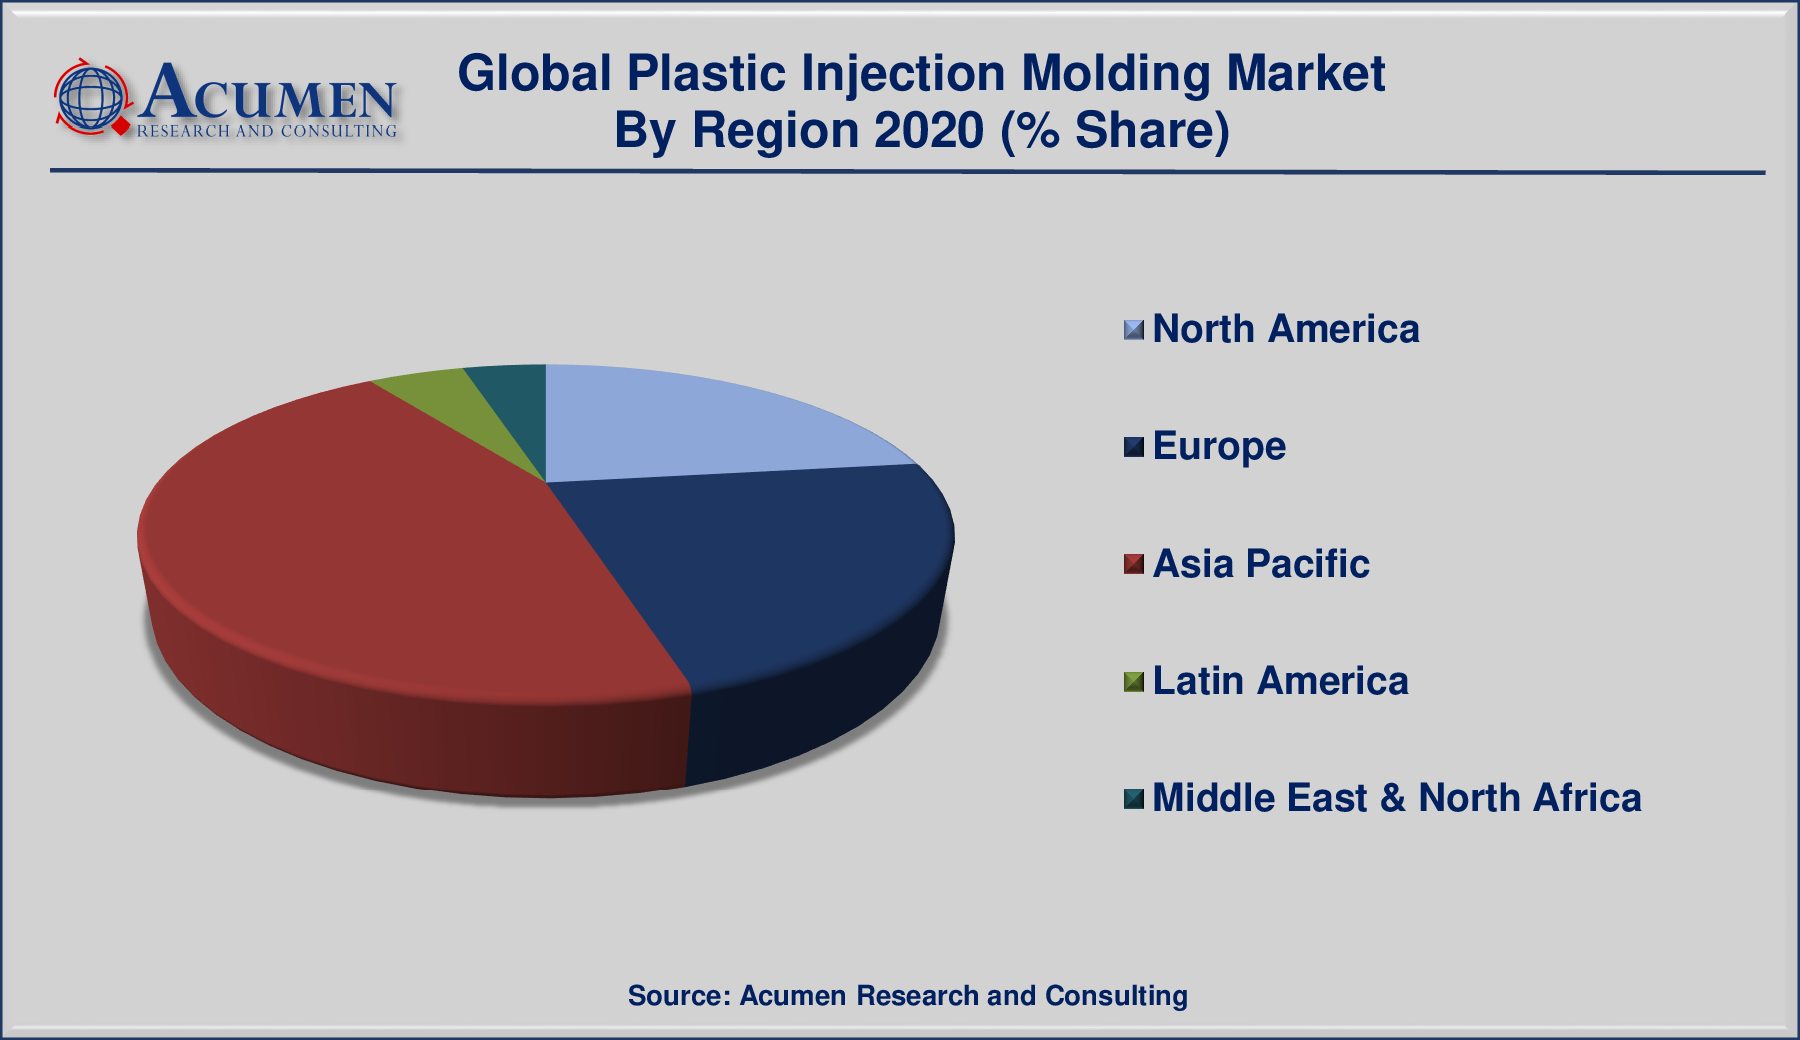 Plastic Injection Molding Market Analysis was valued at USD 260.30 Billion in 2020 and is predicted to be worth USD 377.41 Billion by 2028, with a CAGR of 4.8% from 2021 to 2028.